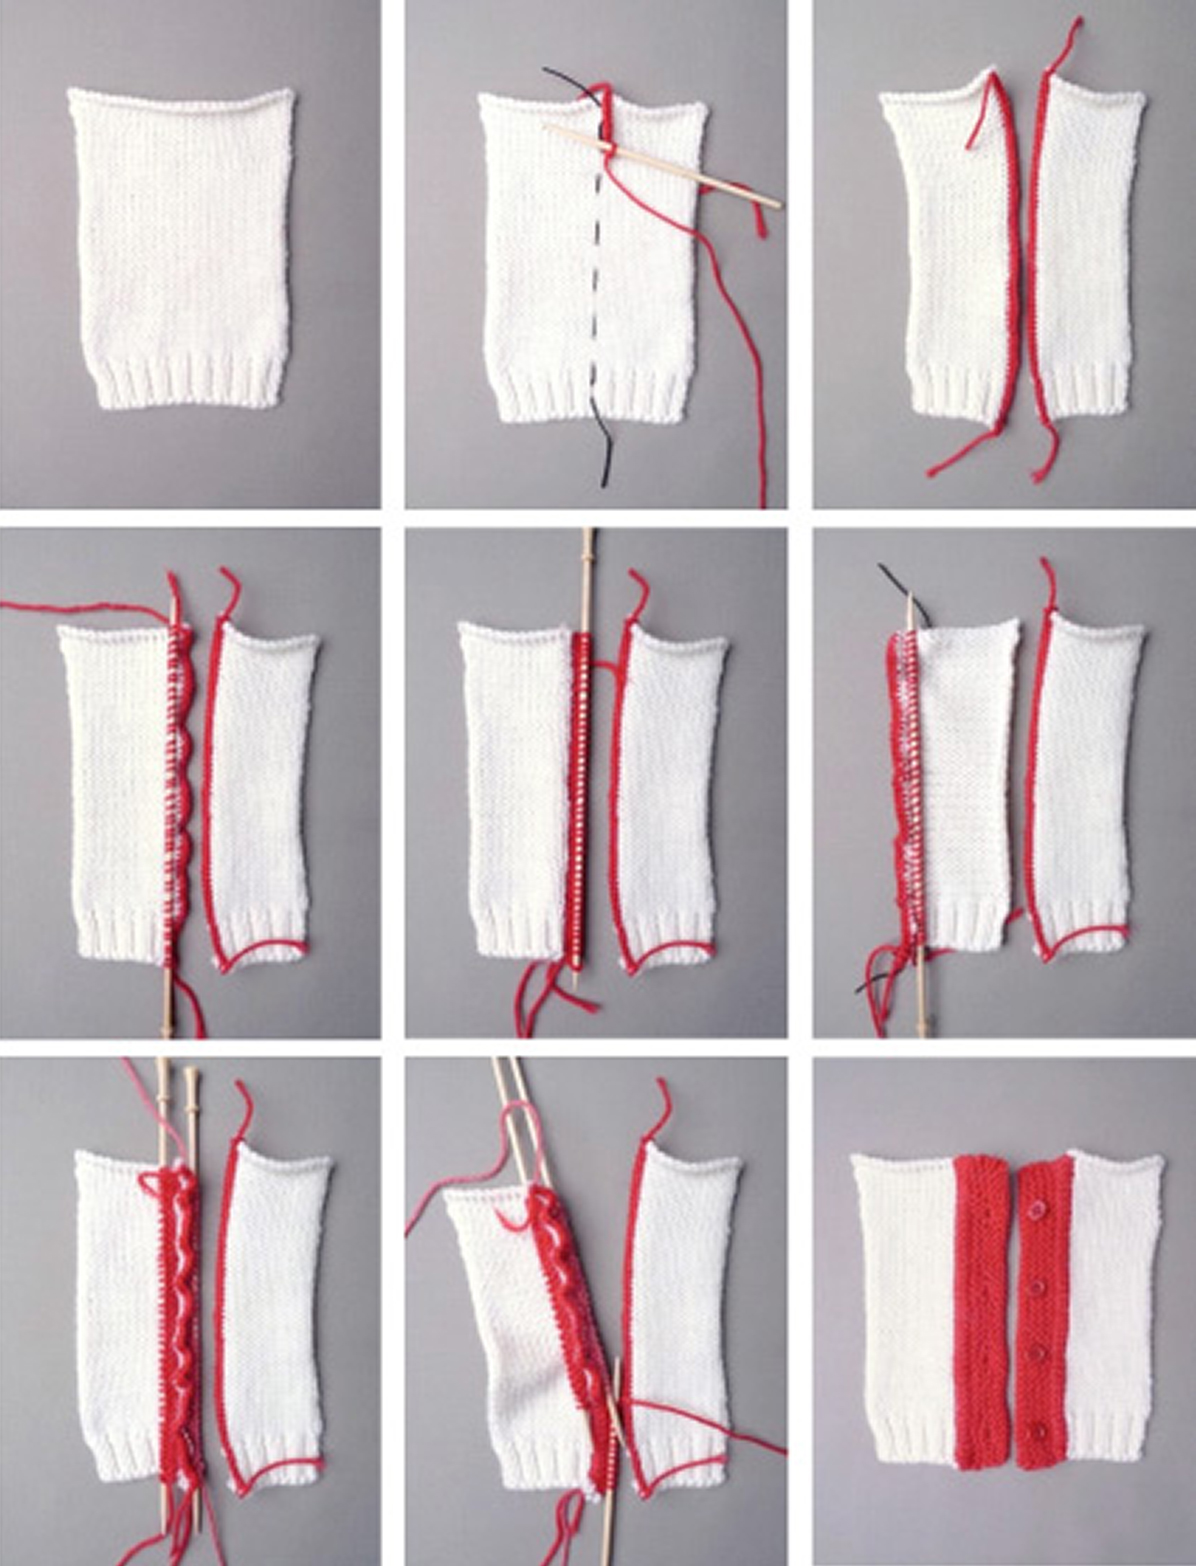 Re-knitting step by step guide, Amy Twigger Holroyd, 2012. Digital prints on paper